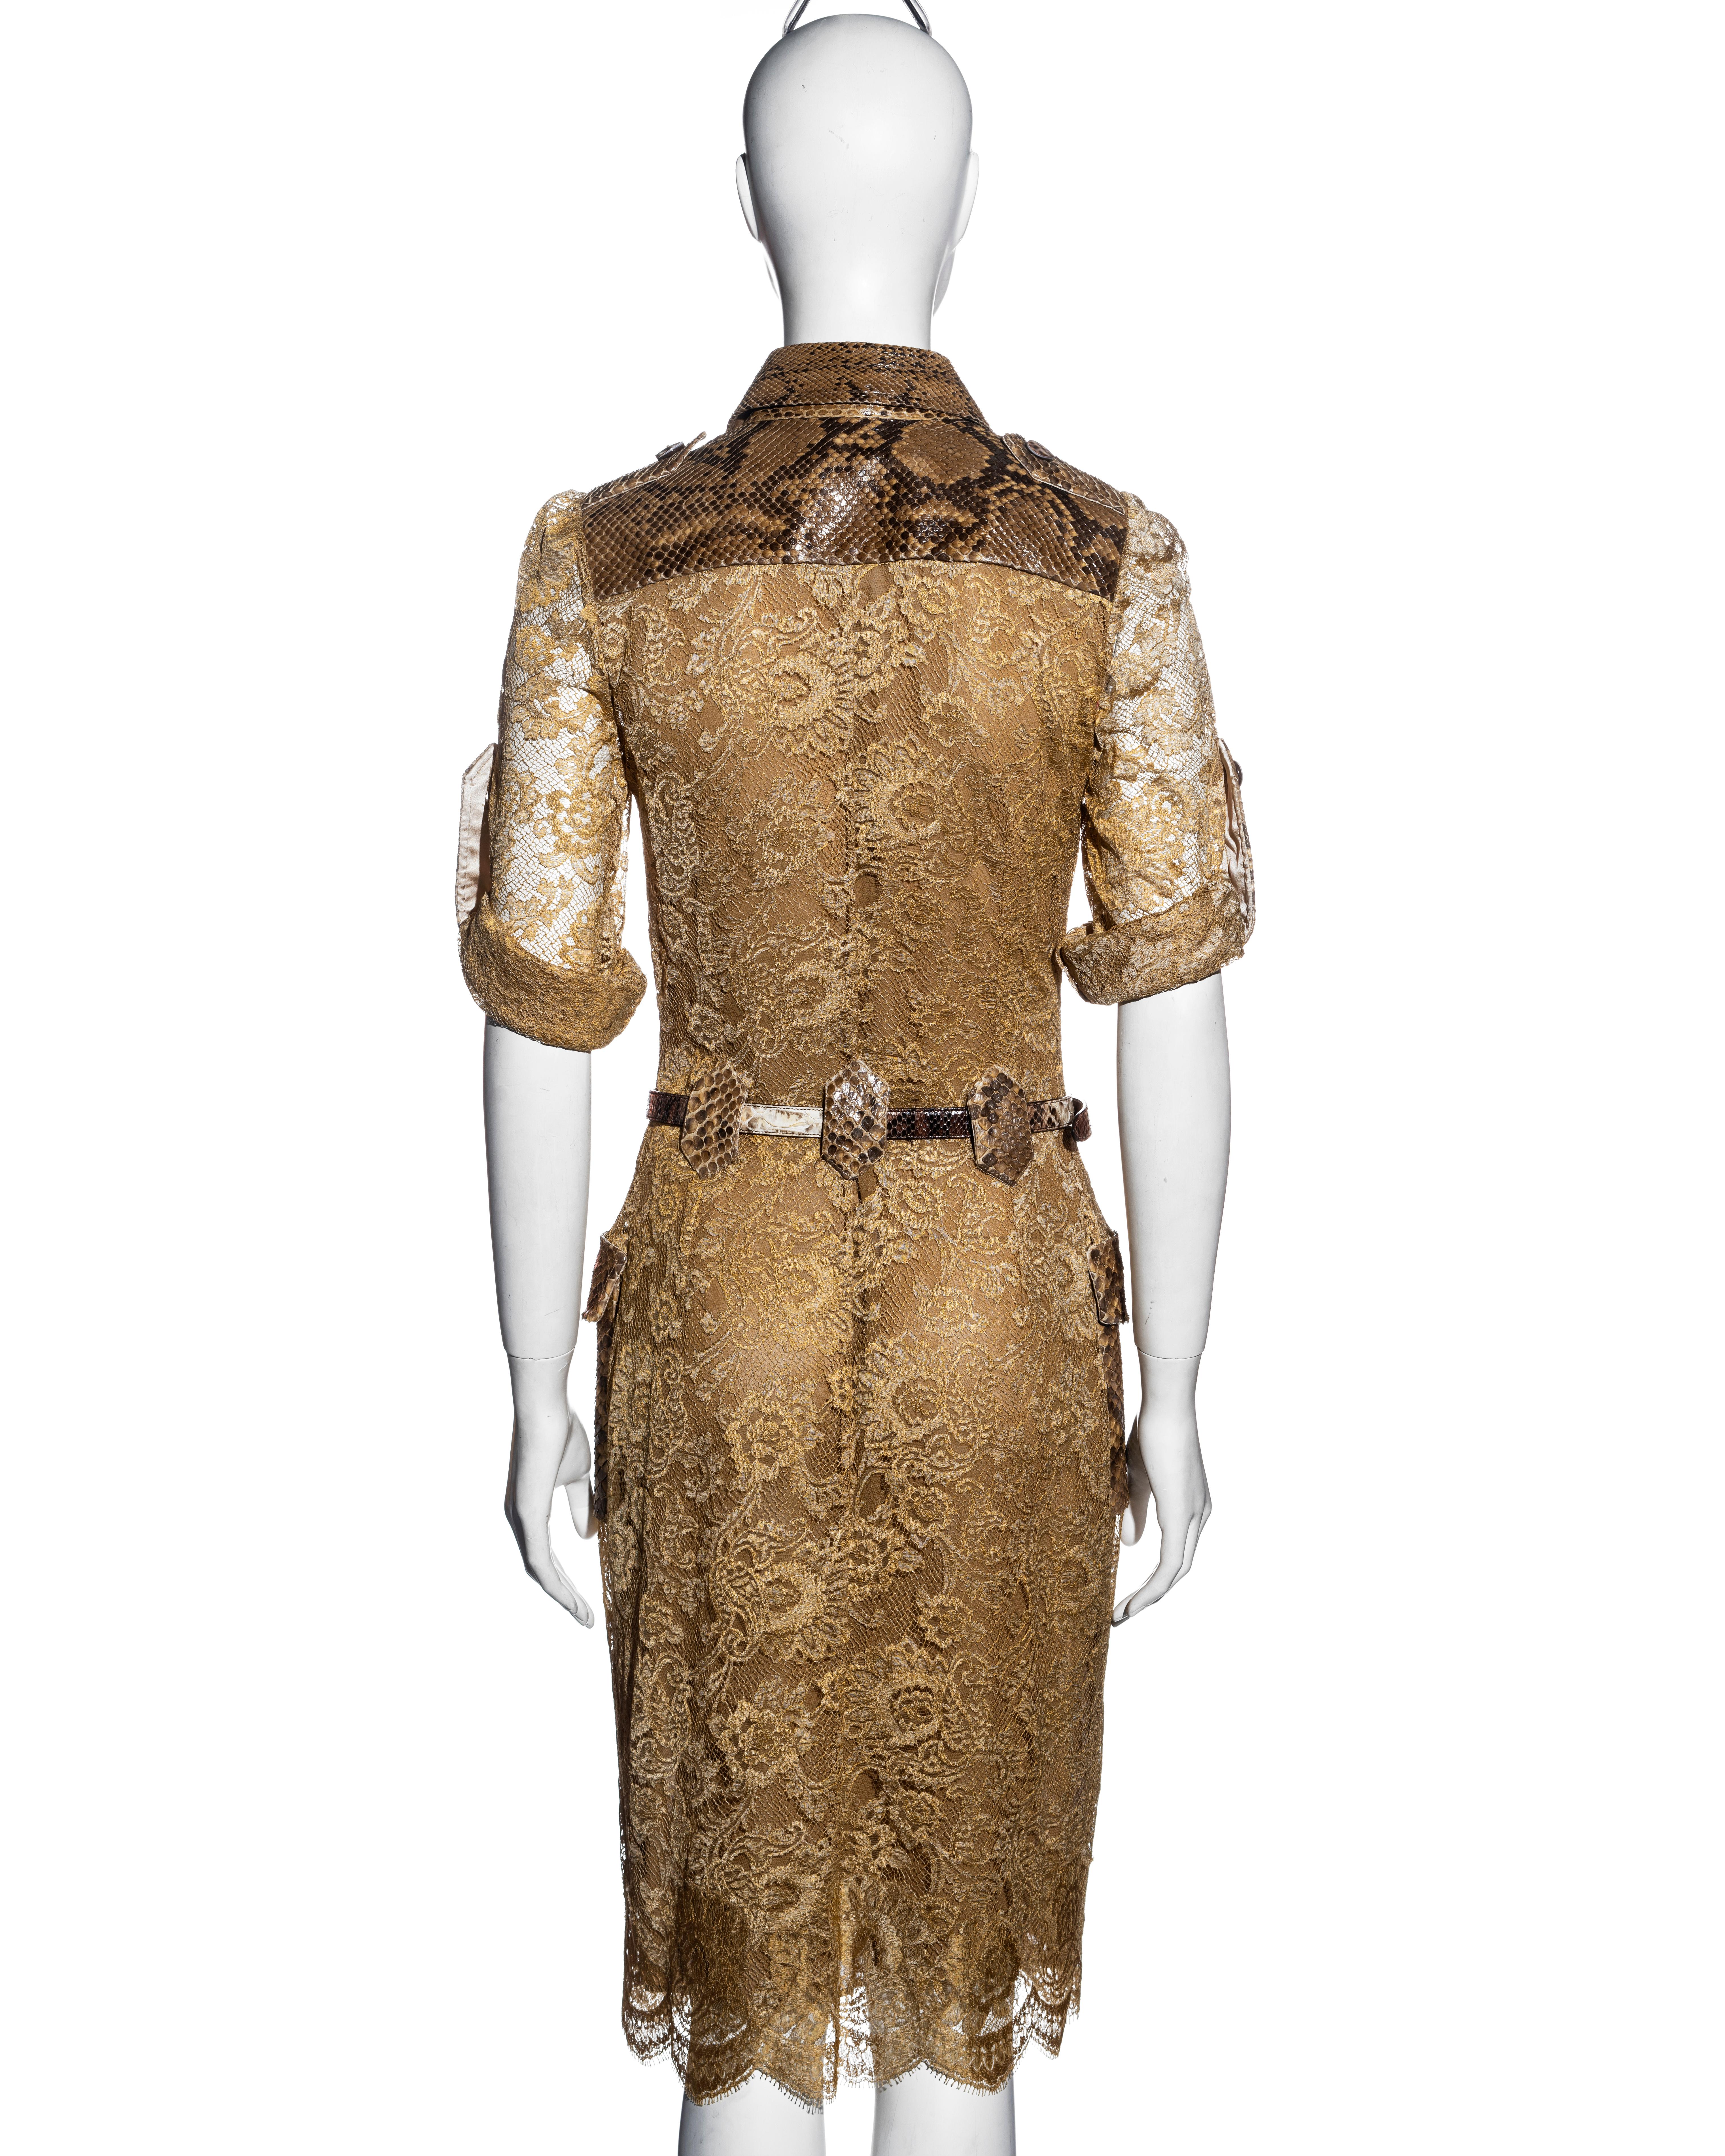 Dolce & Gabbana gold lace and python shirt dress, ss 2005 For Sale 1